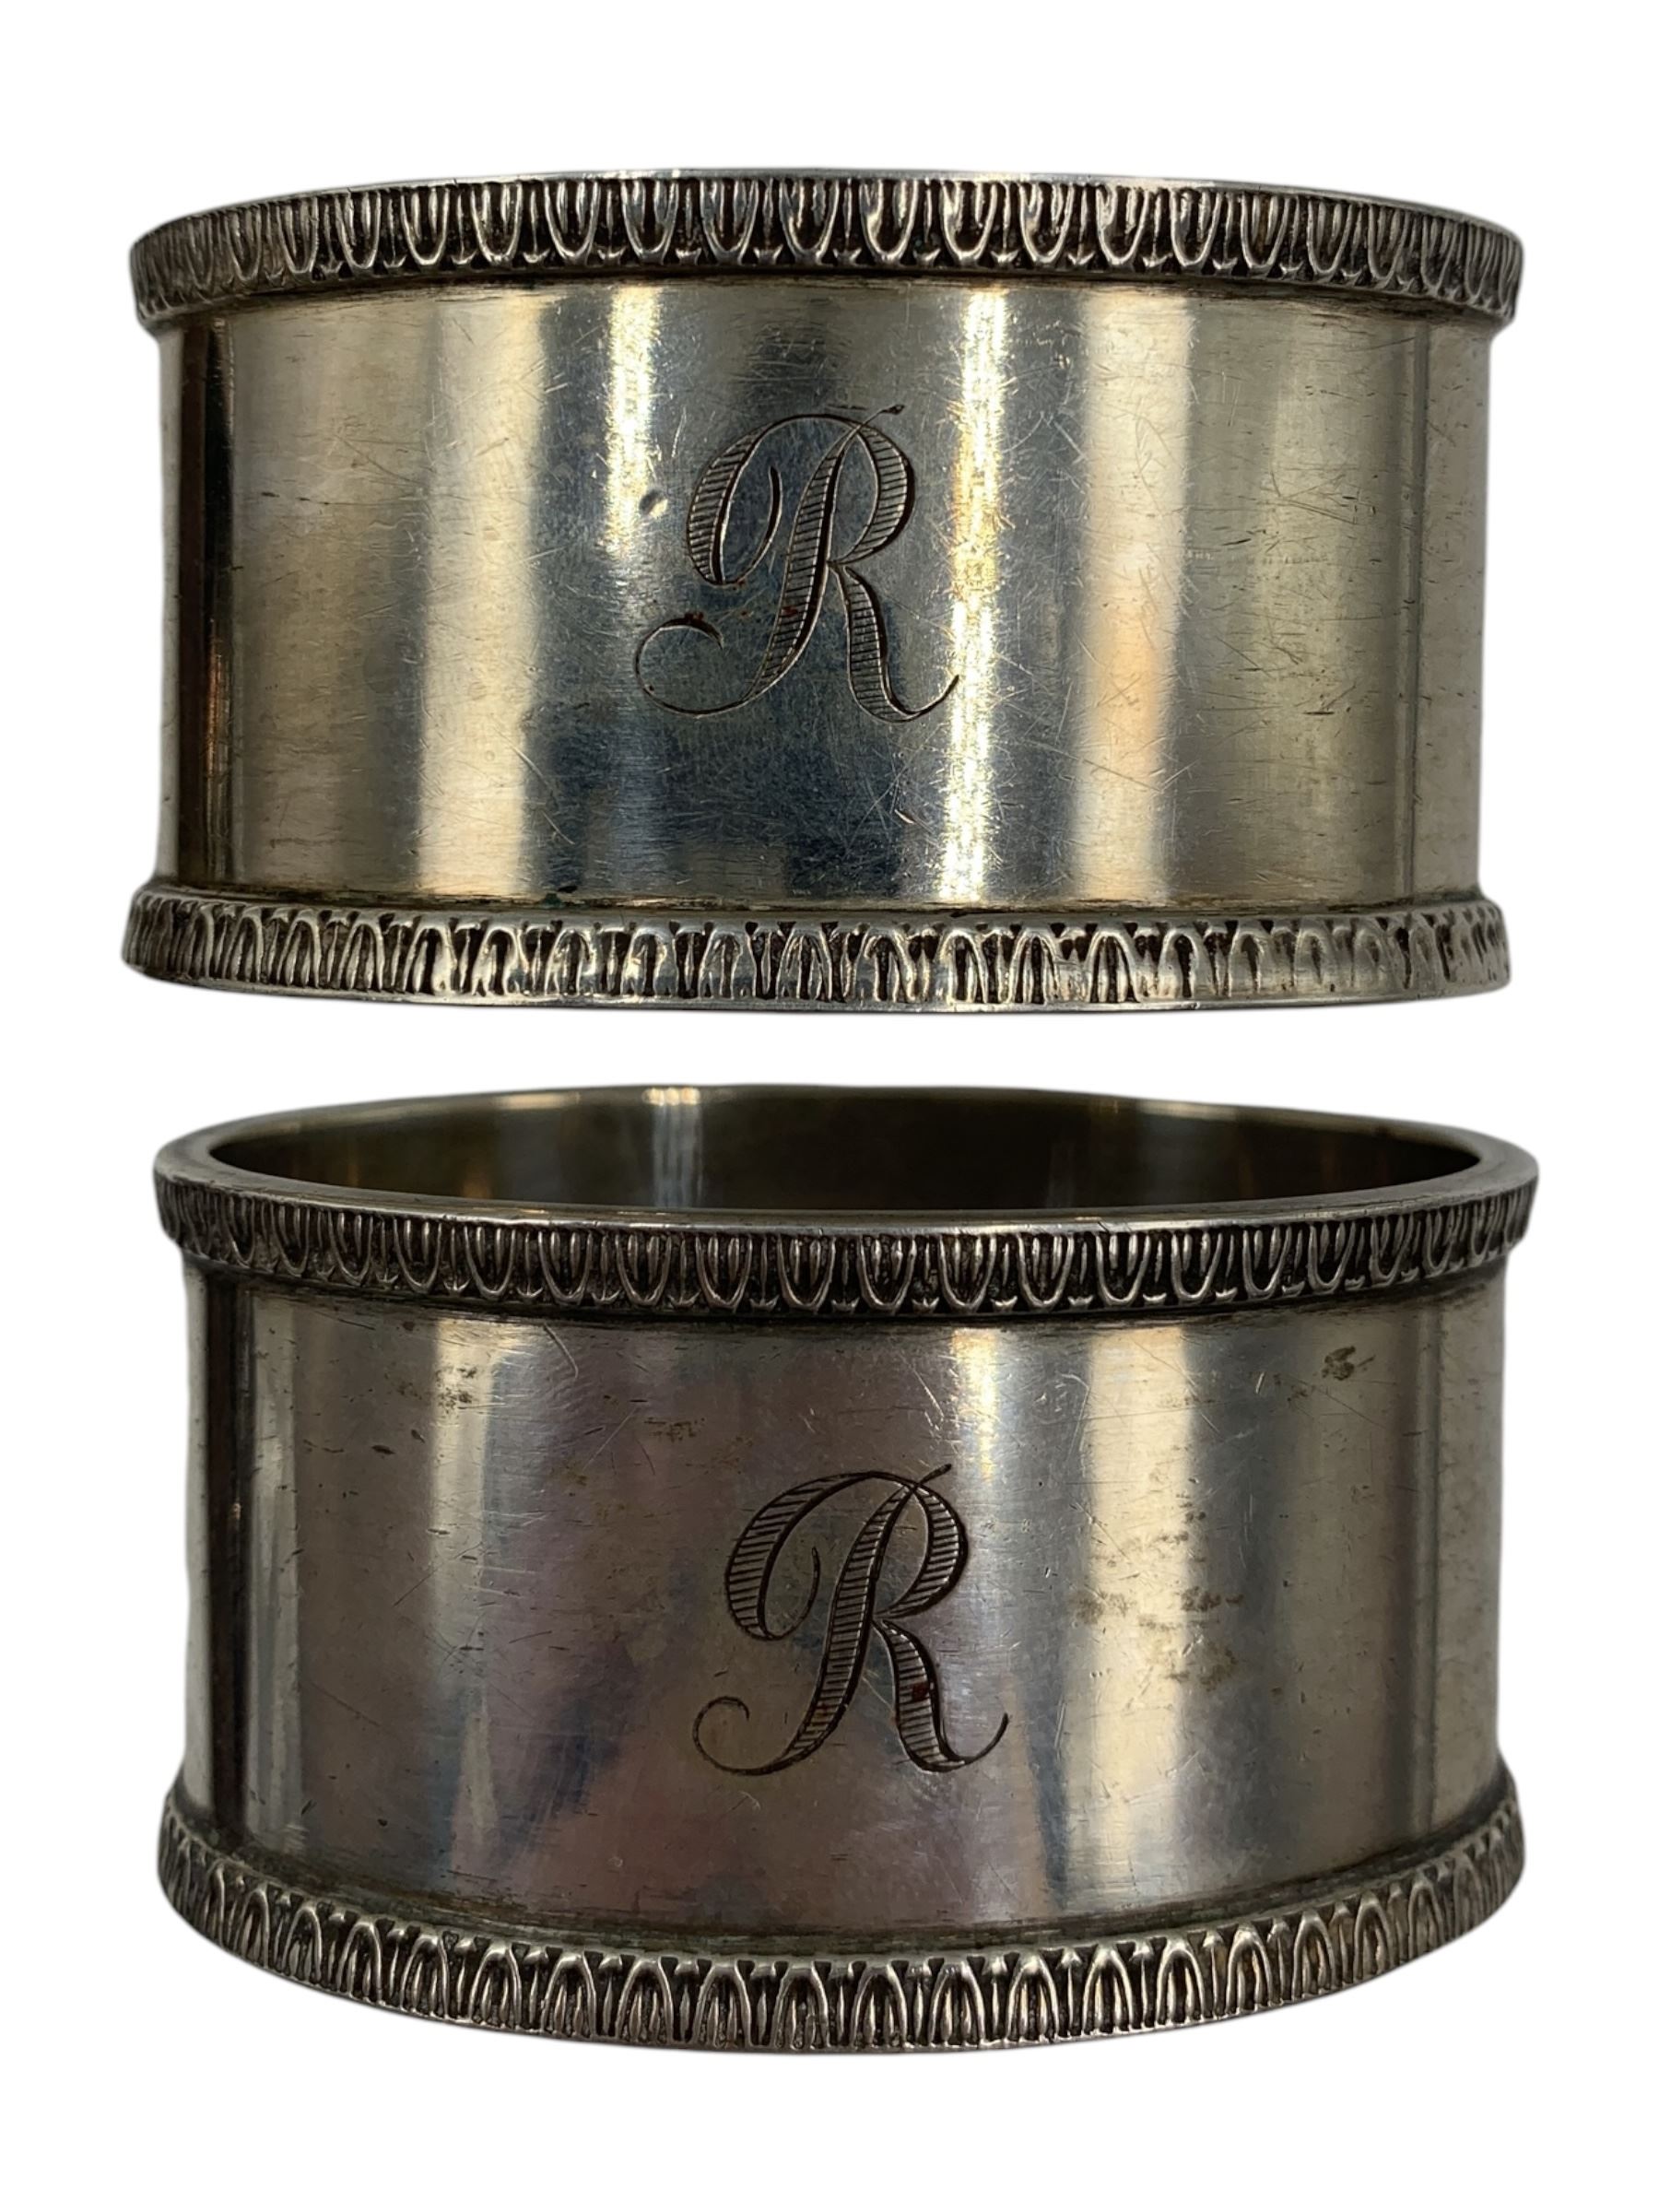 Pair of heavy silver oval napkin rings - Image 2 of 4